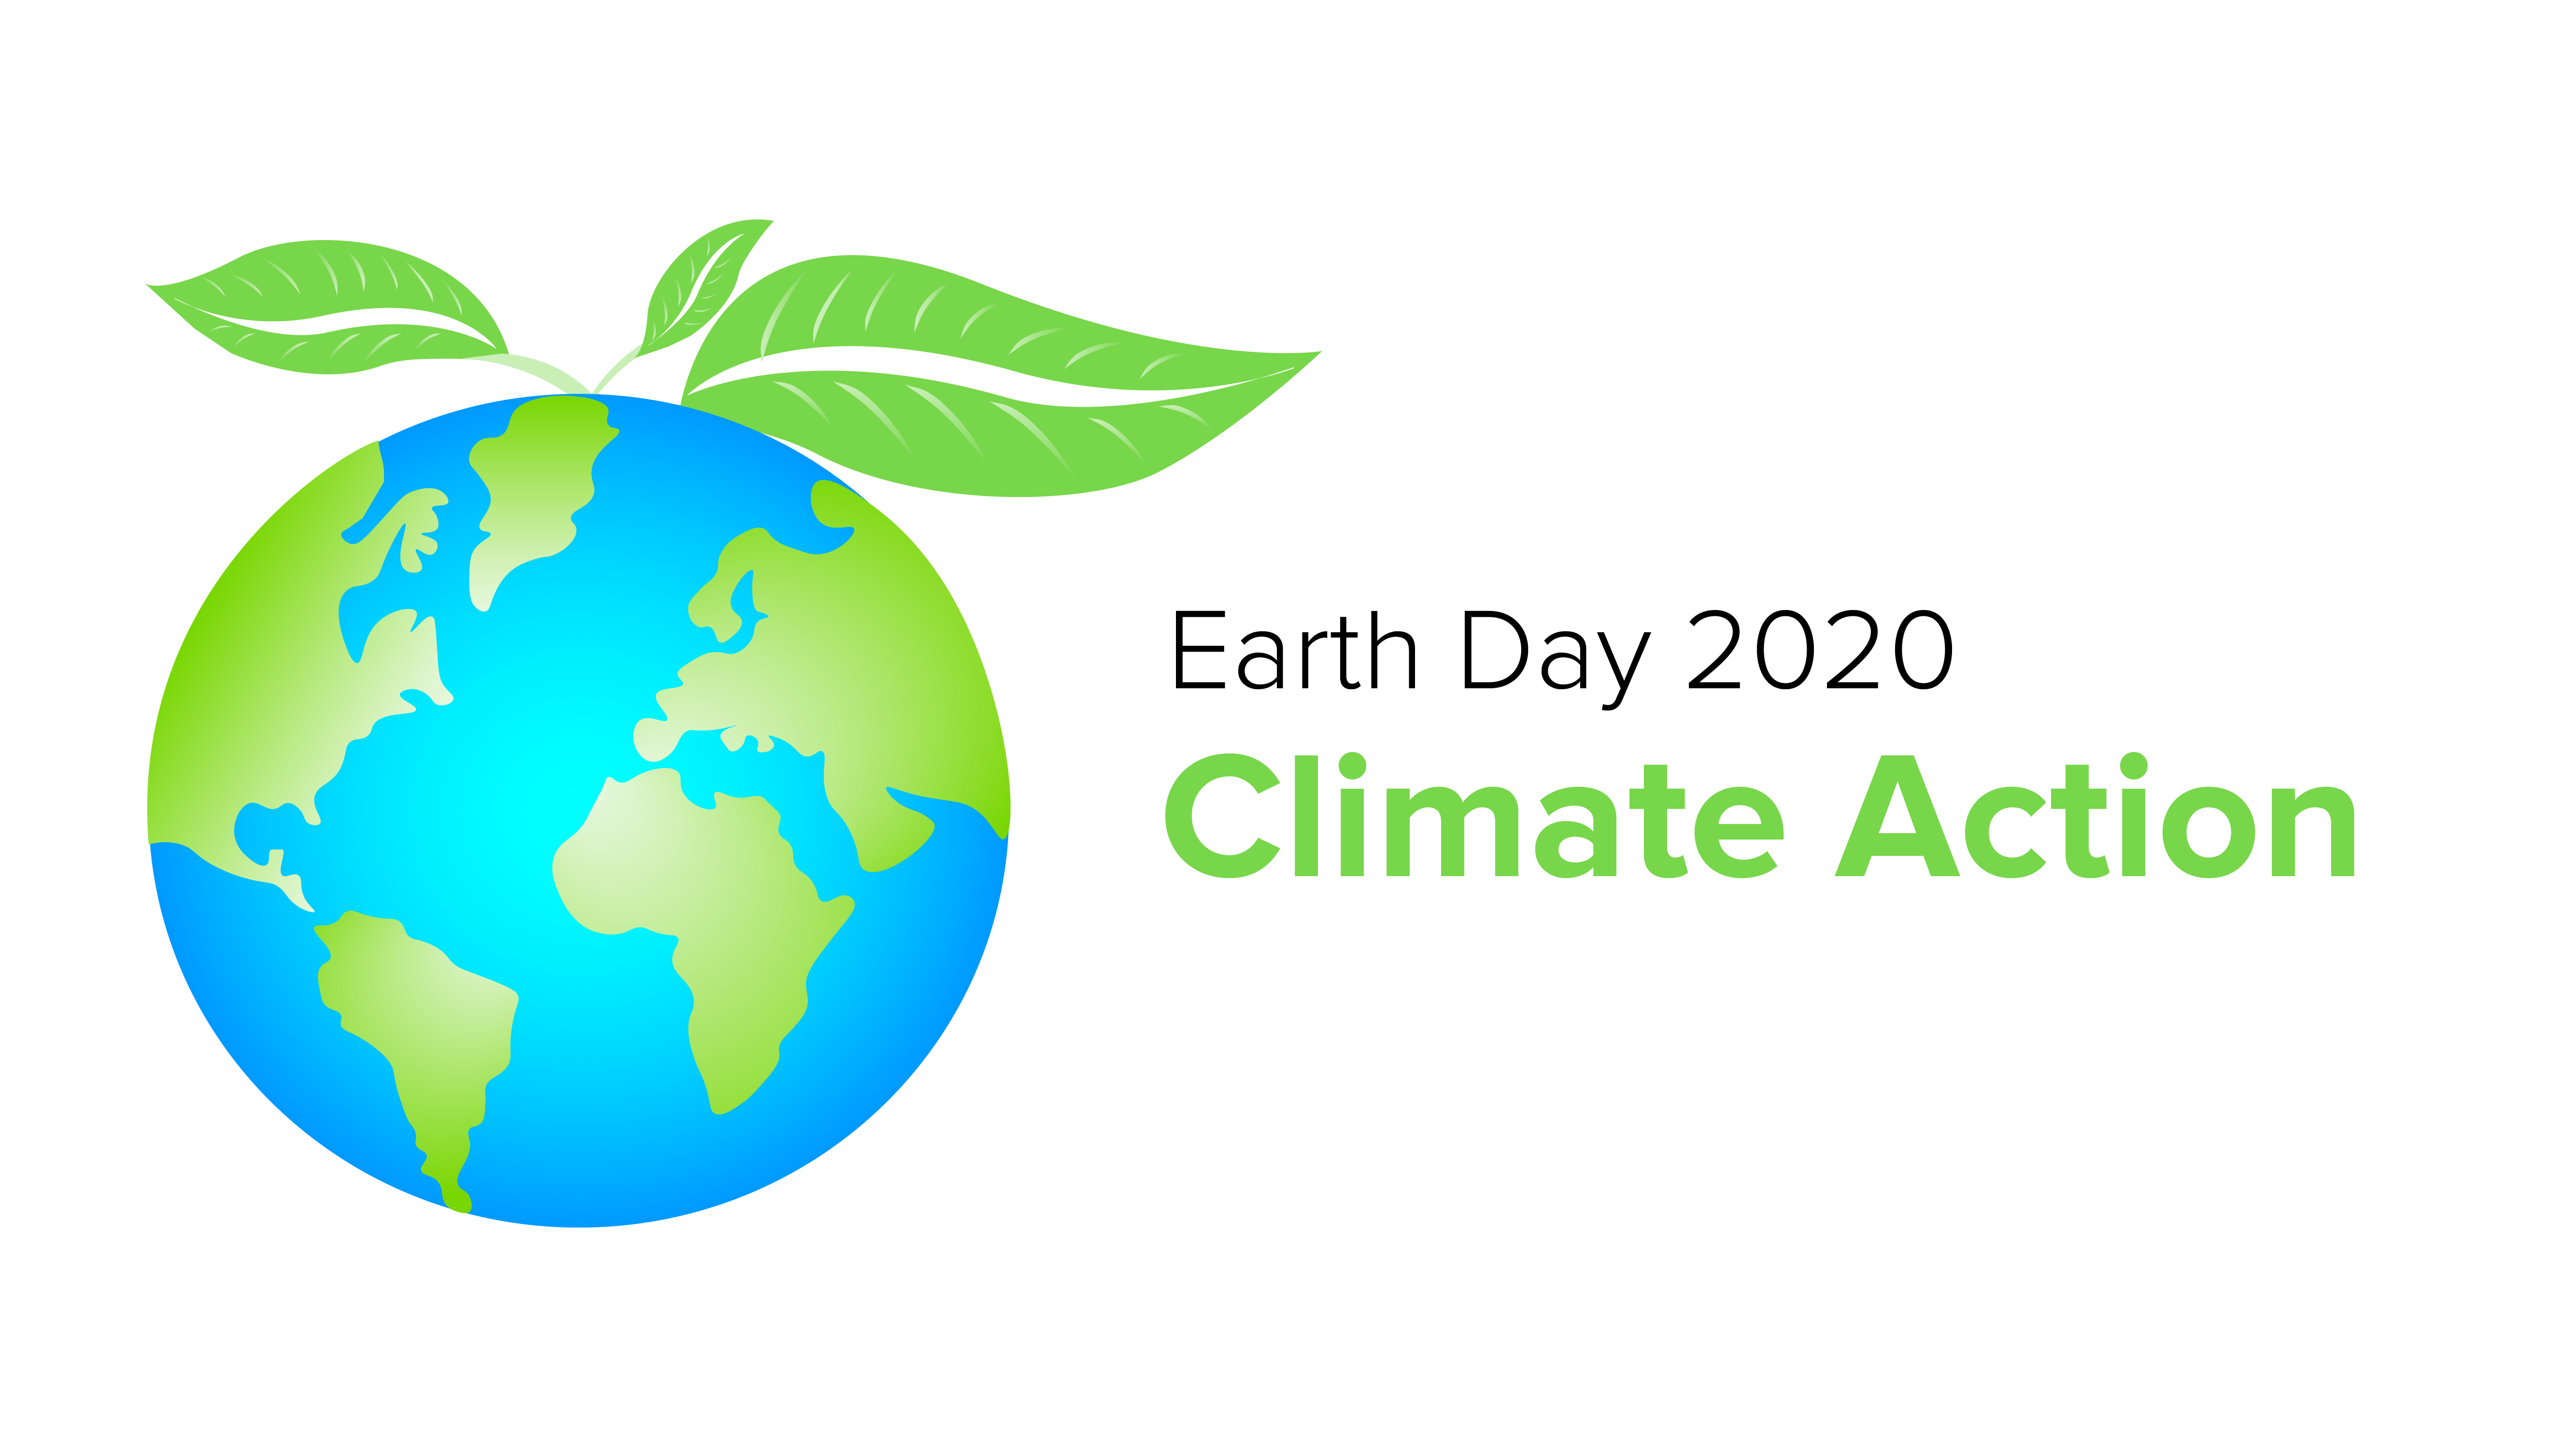 Earth Day 2020 Climate Action logo